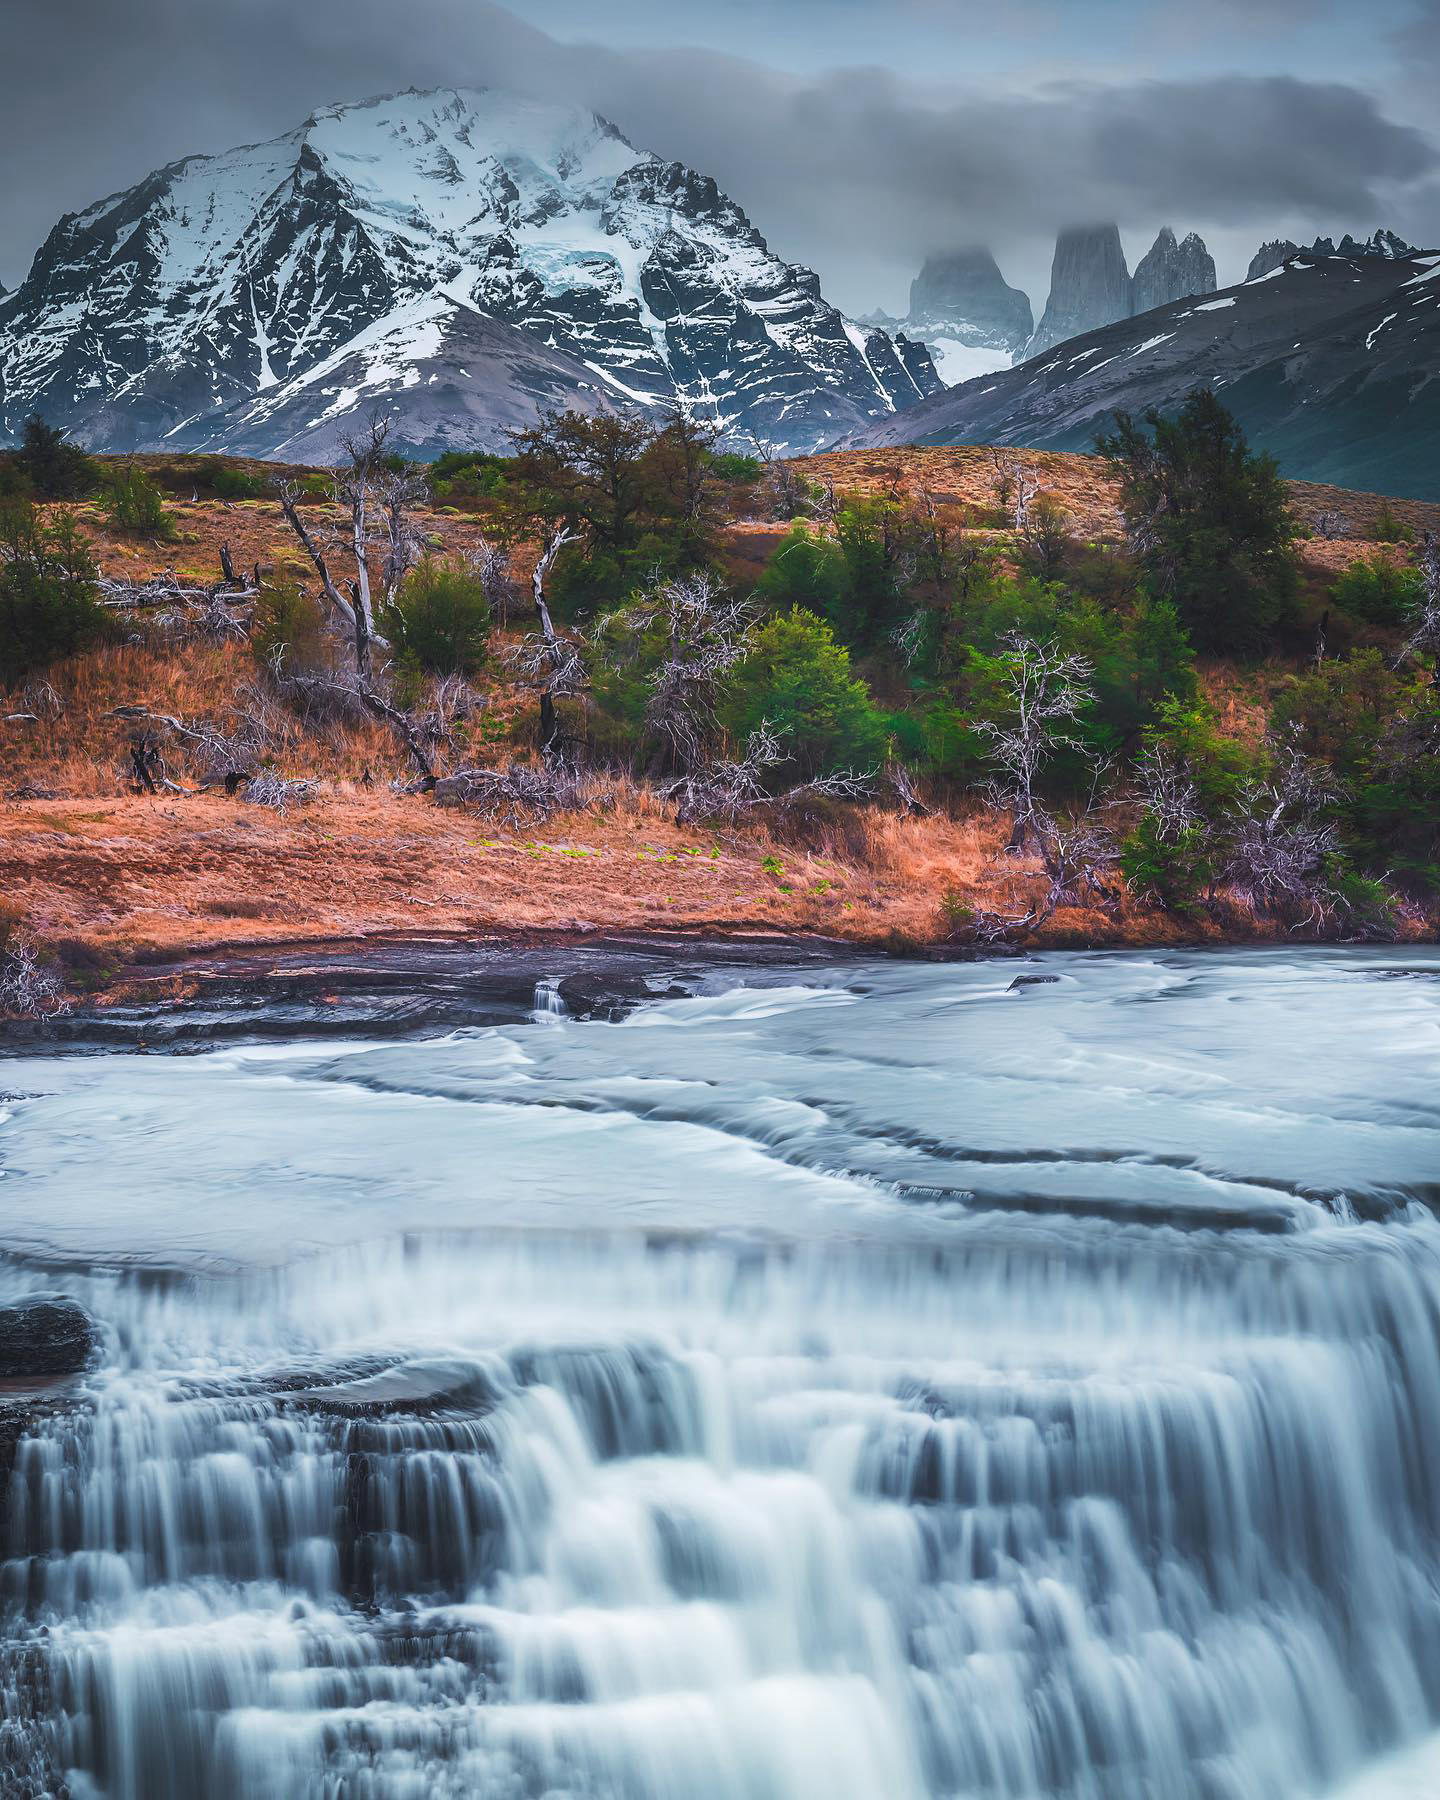 Waterfalls of Torres del Paine National ParkPatagonia is a dream trip with amazing wildlife (yes we